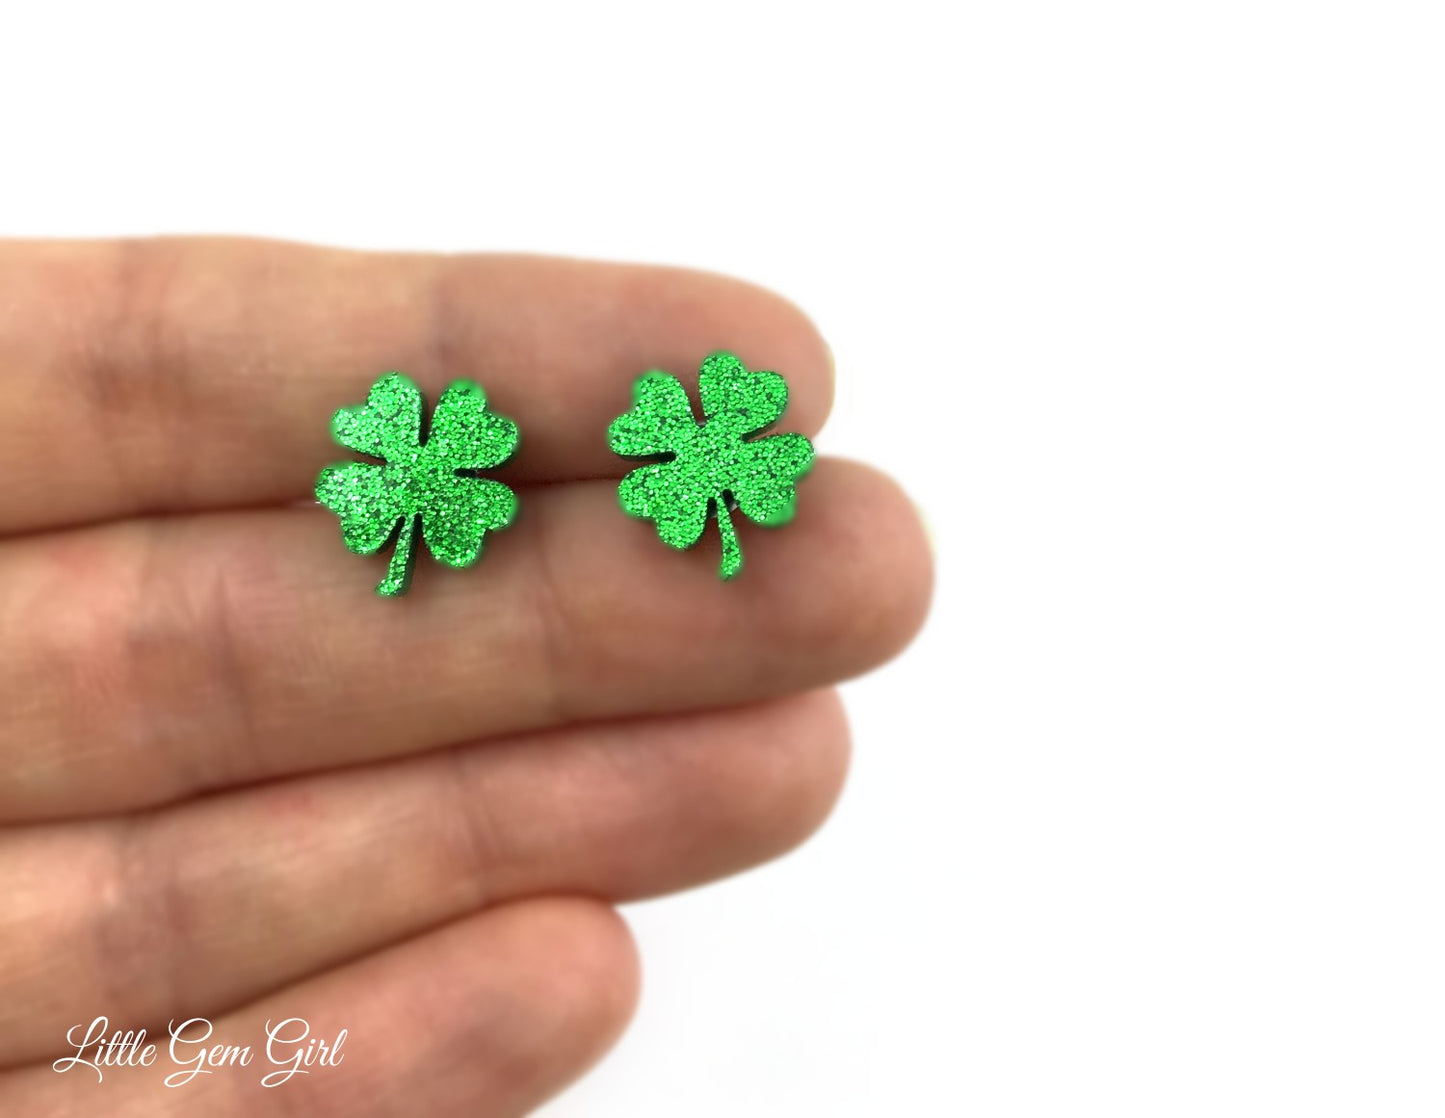 Shamrock Four Leaf Clover Stud Earrings -  Sparkly Green St Patrick's Day - Stainless Steel or Titanium Post